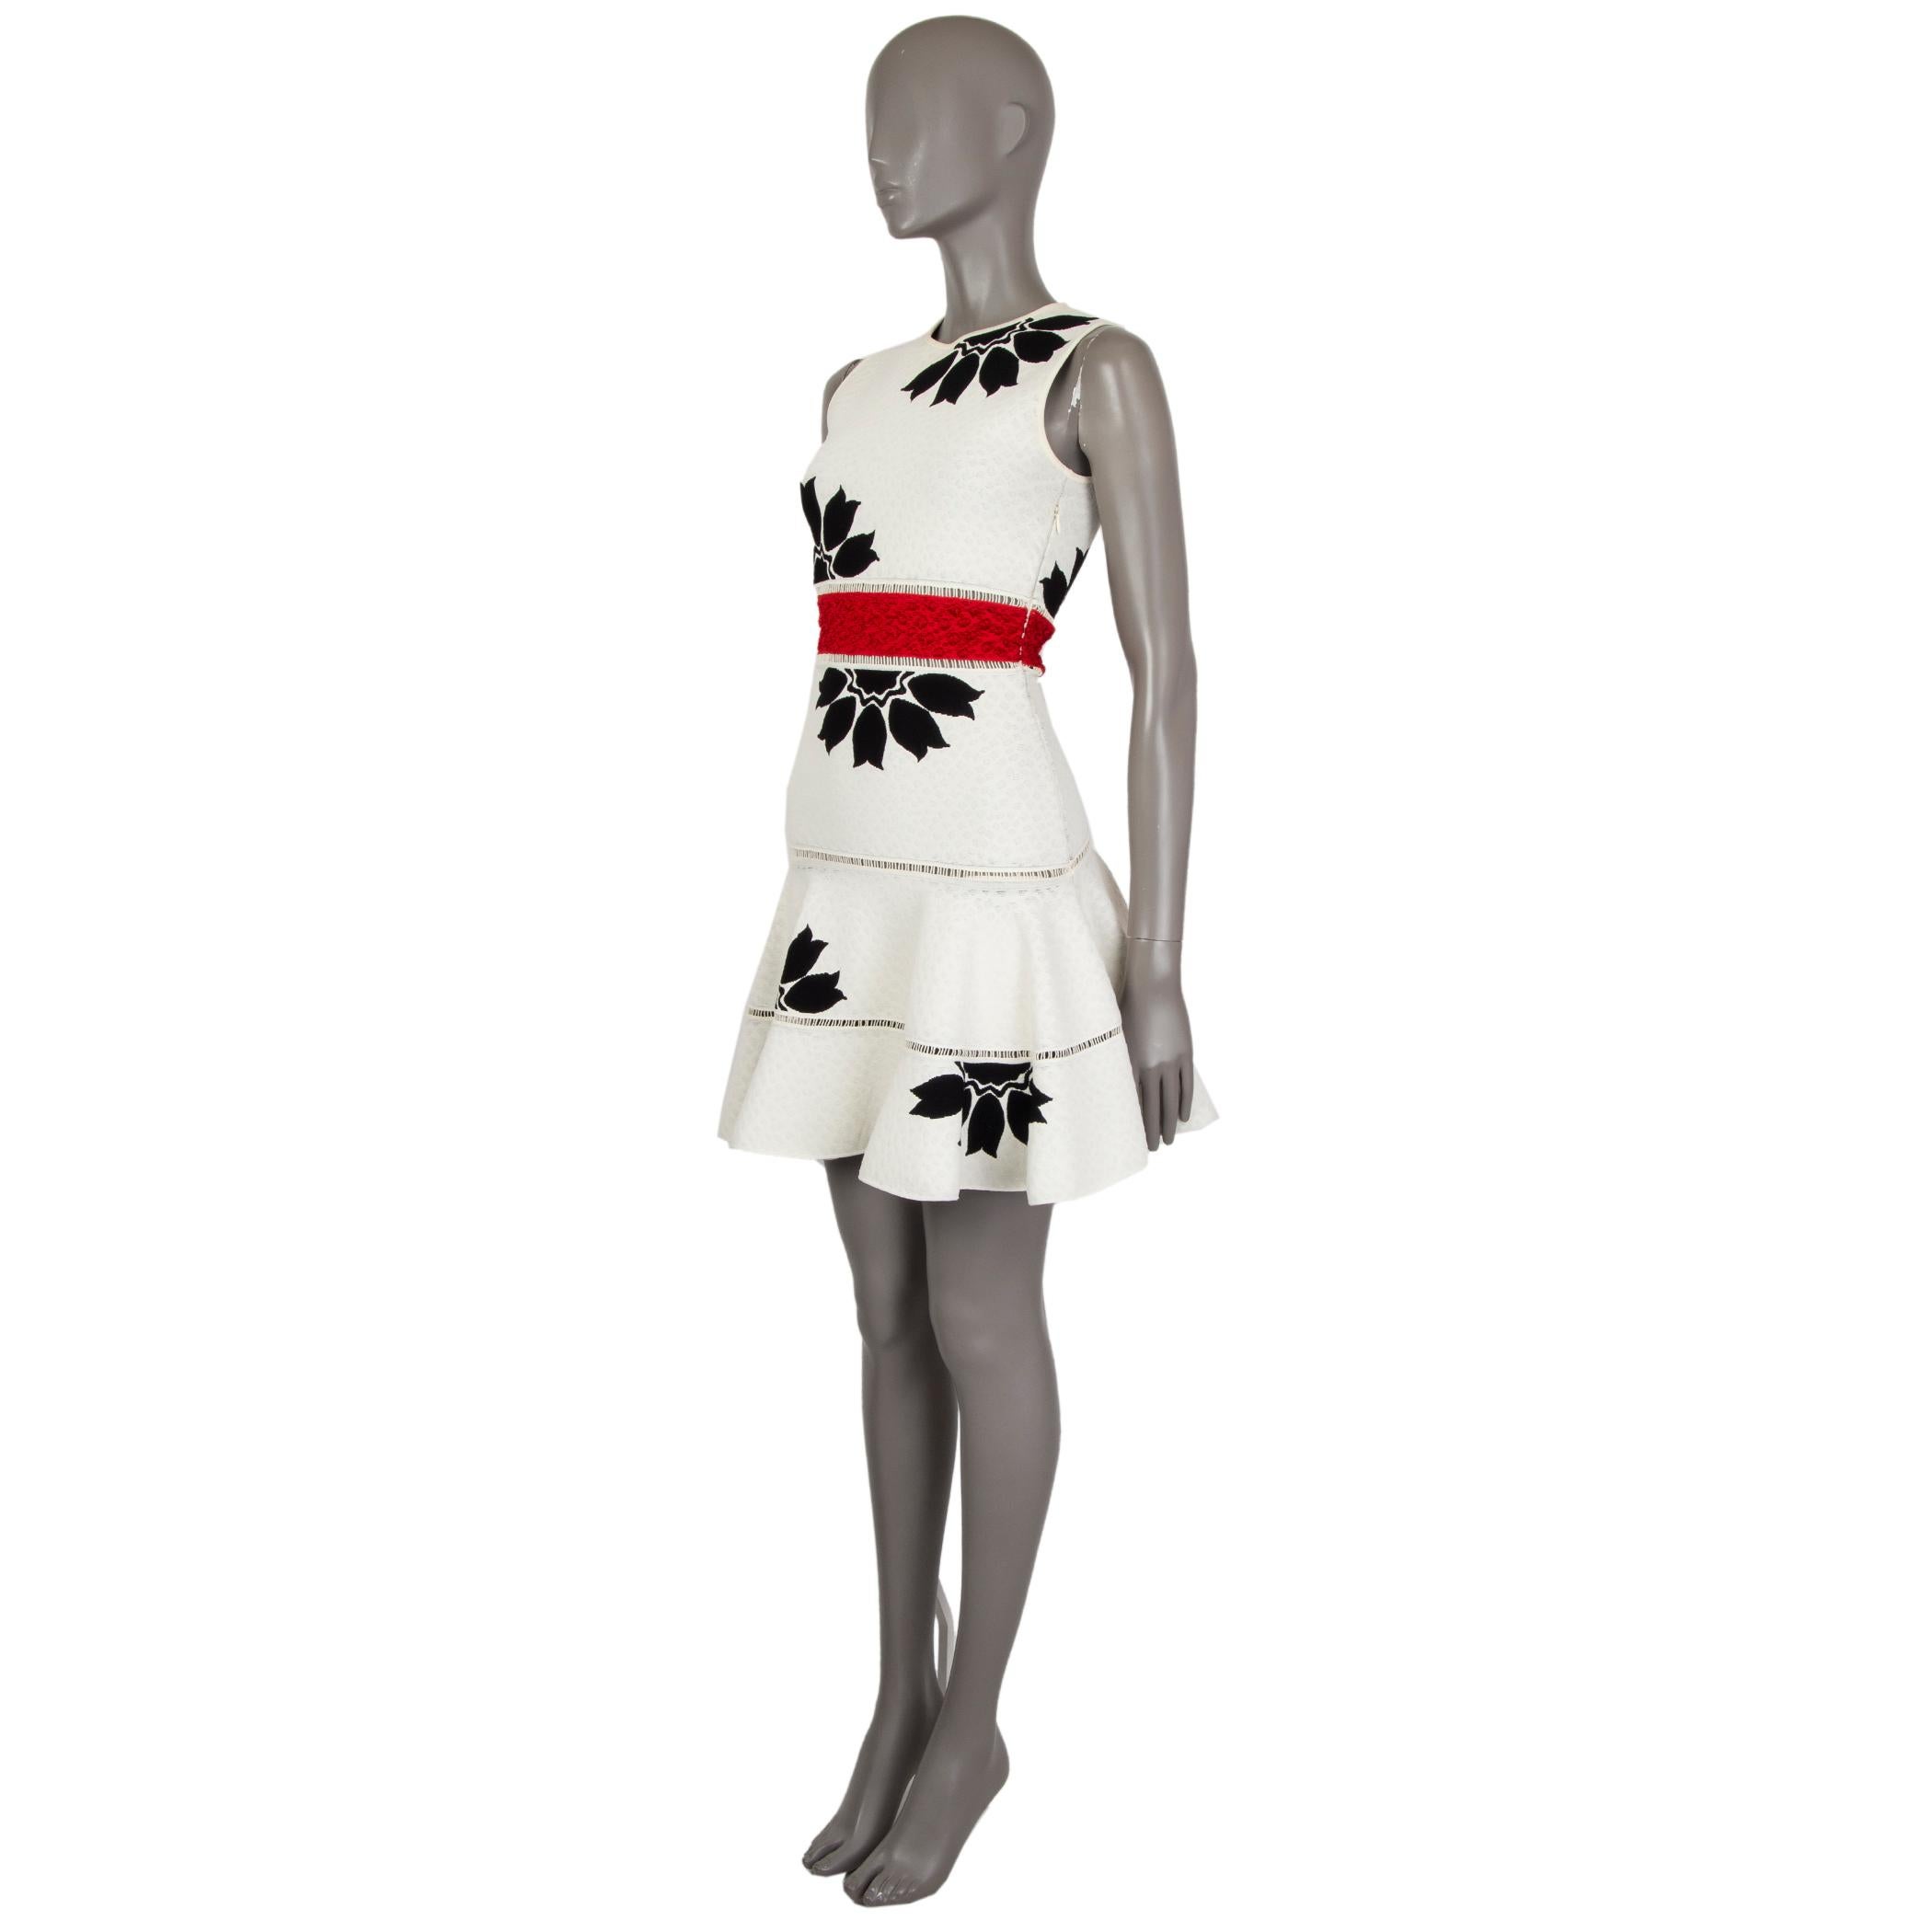 Alexander McQueen floral jacquard-knit dress in cream and black viscose (83%) and polyester (17%). With embroidered waistband in red acetate (63%), viscose (31%), and polyester (6%). Features a crew neck and flared skirt. Closes with invisible